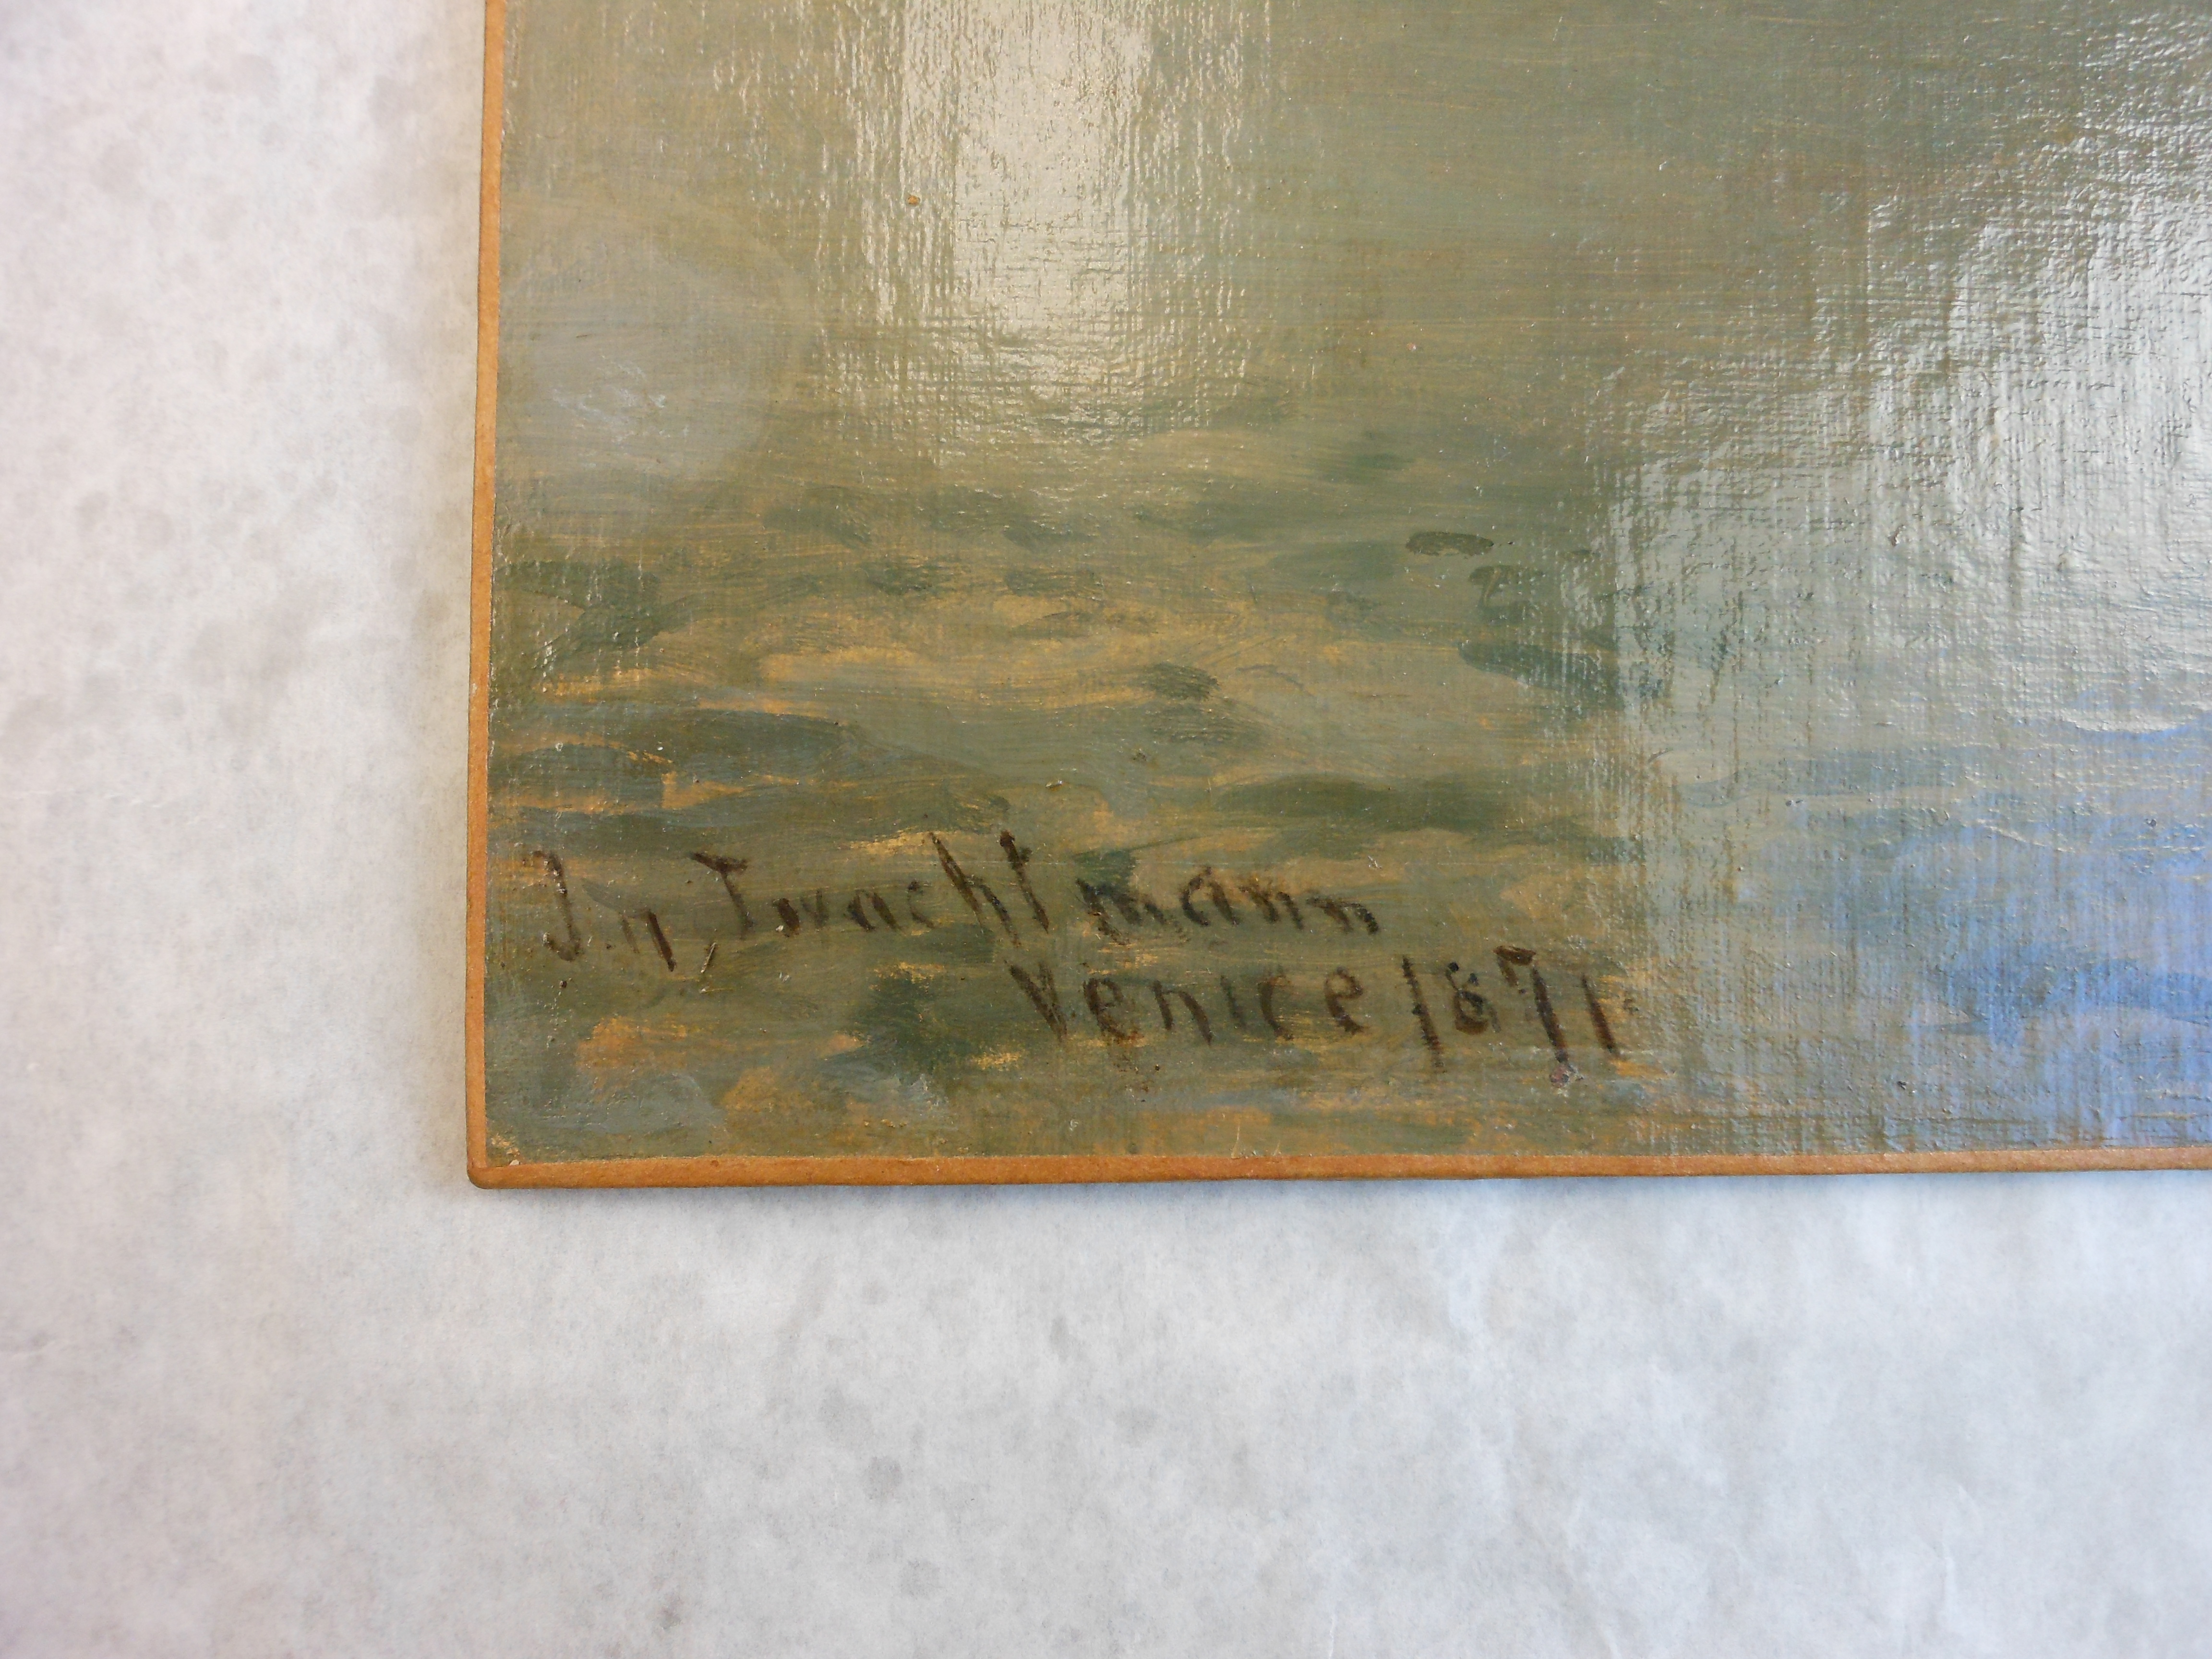 detail of the signature on the painting